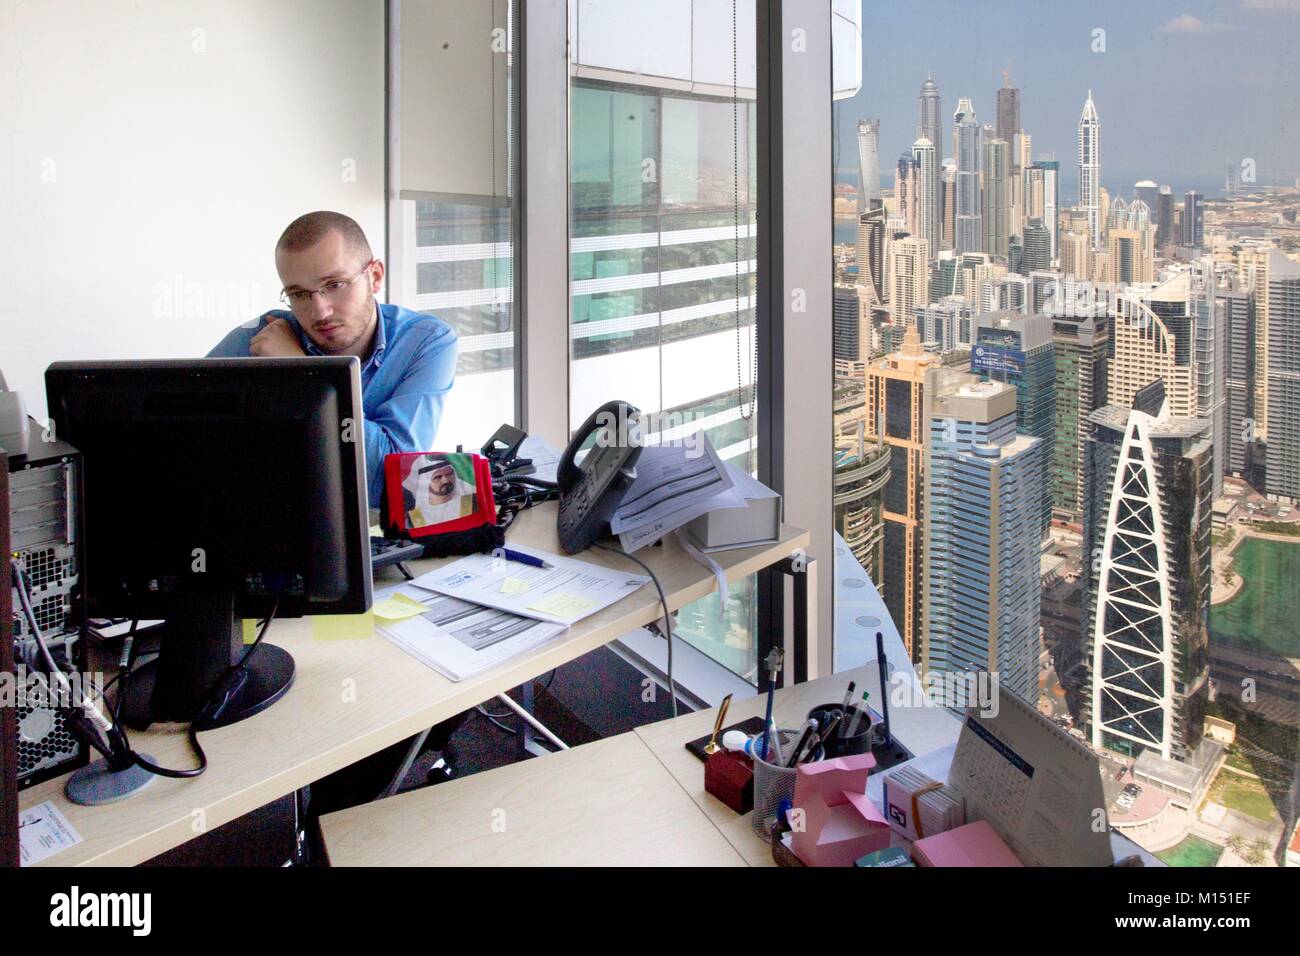 United Arab Emirates, Dubai, office with view on JLT, Jumeirah Lake Towers and Al Sufouh towers Stock Photo